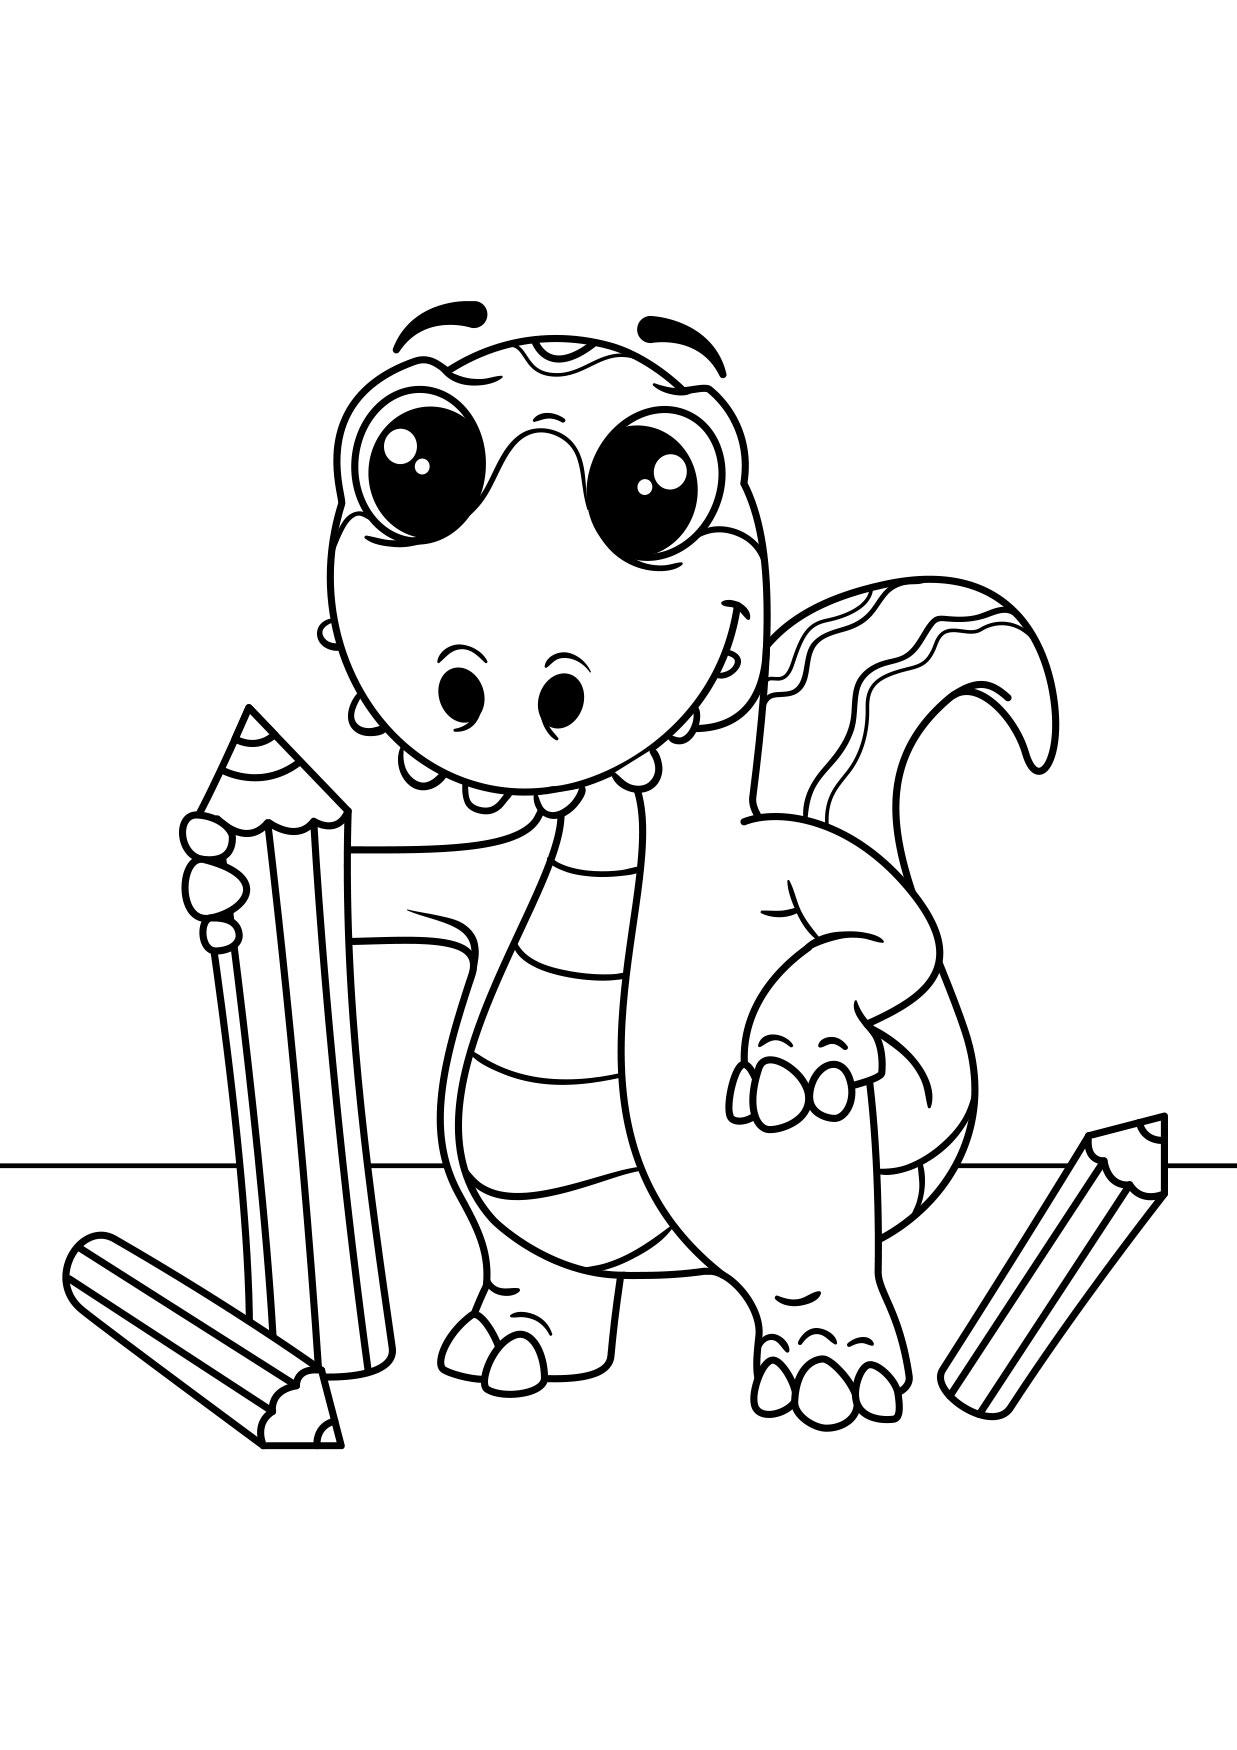 Coloring Page dinosaur draws   free printable coloring pages   Img ...